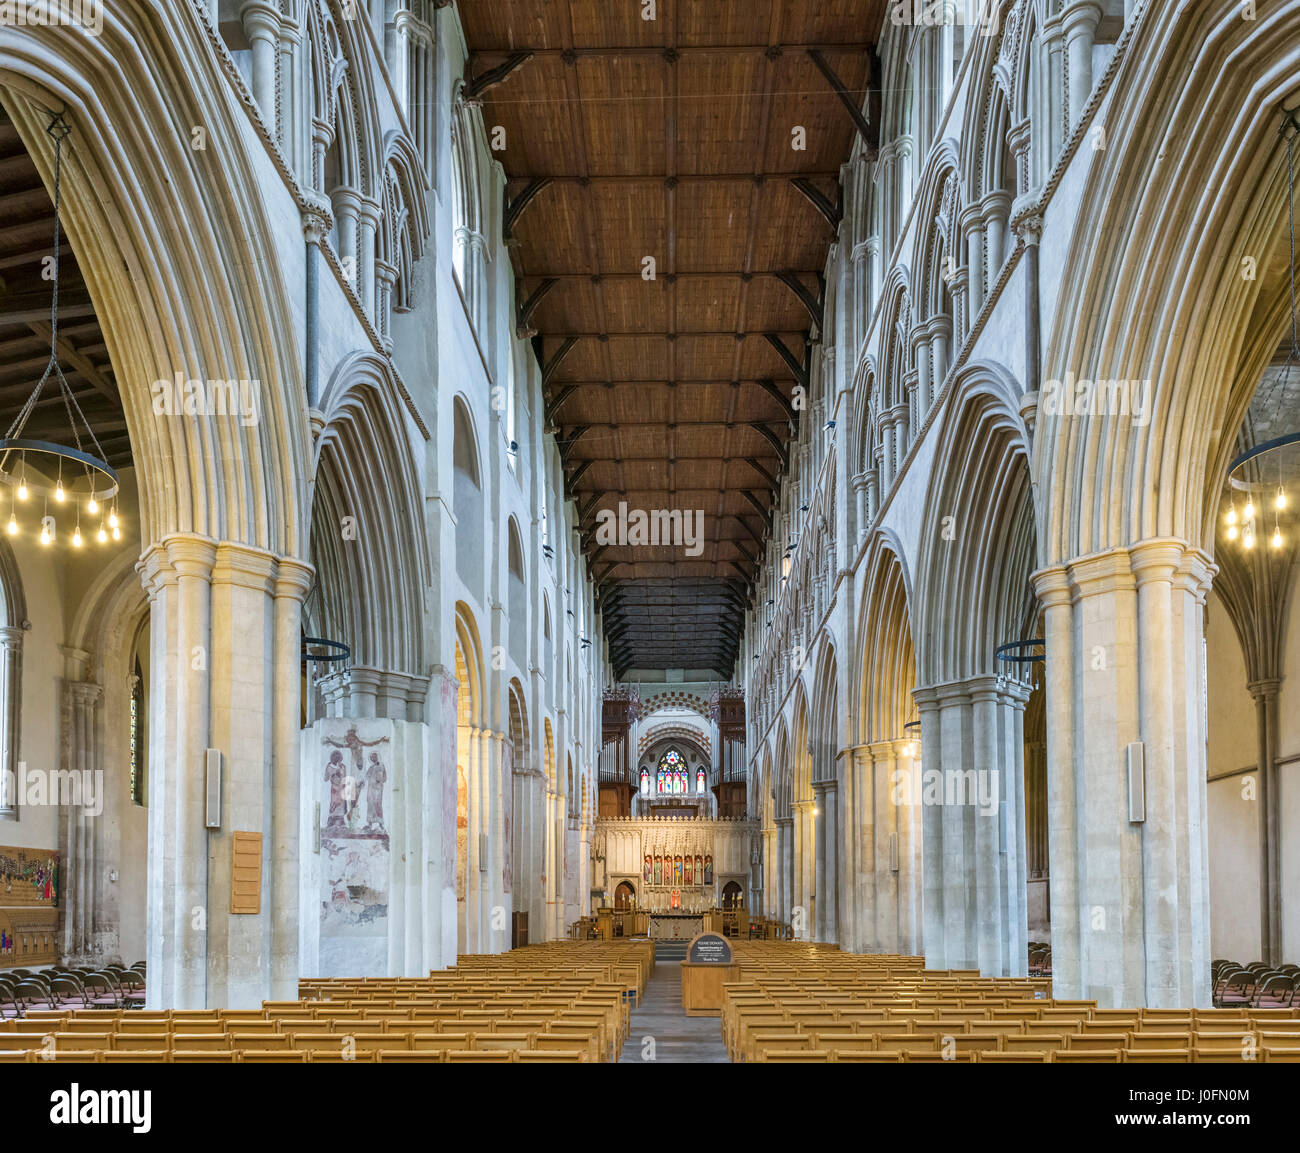 St Albans Cathedral. Nave of the Cathedral and Abbey Church of St Alban, St Albans, Hertfordshire, England, UK Stock Photo